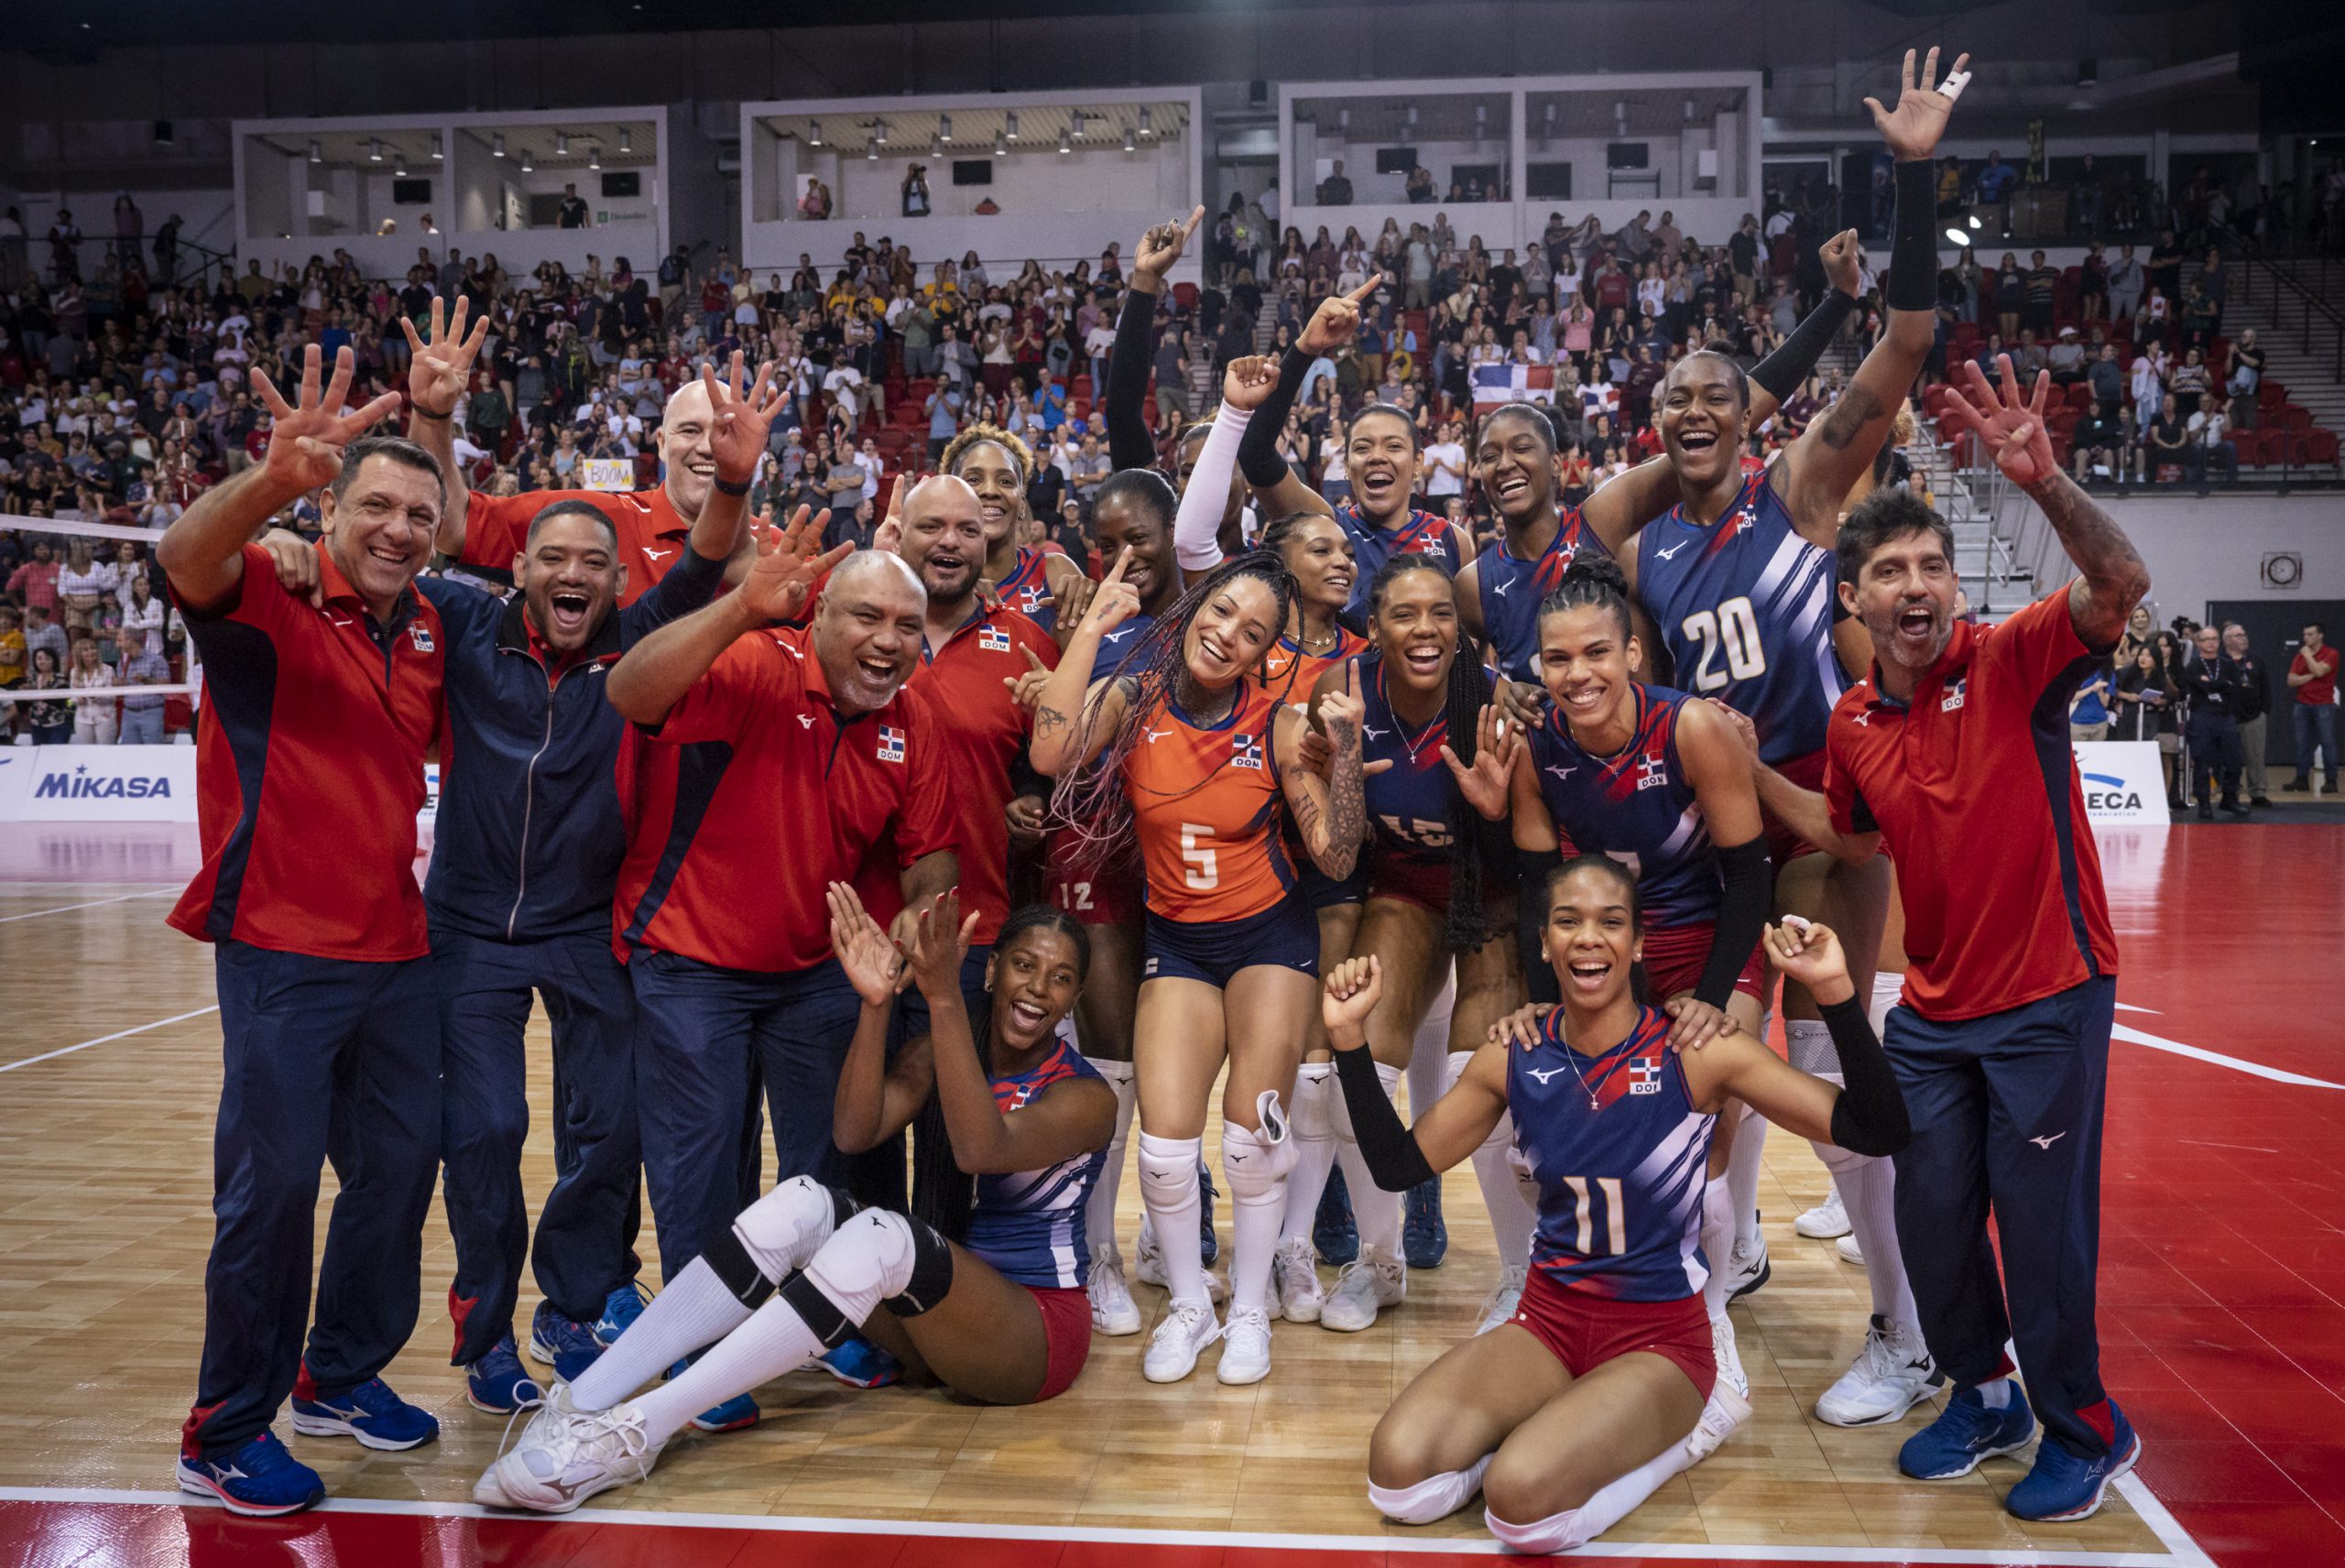 Dominican Republic wins epic match over USA for Gold